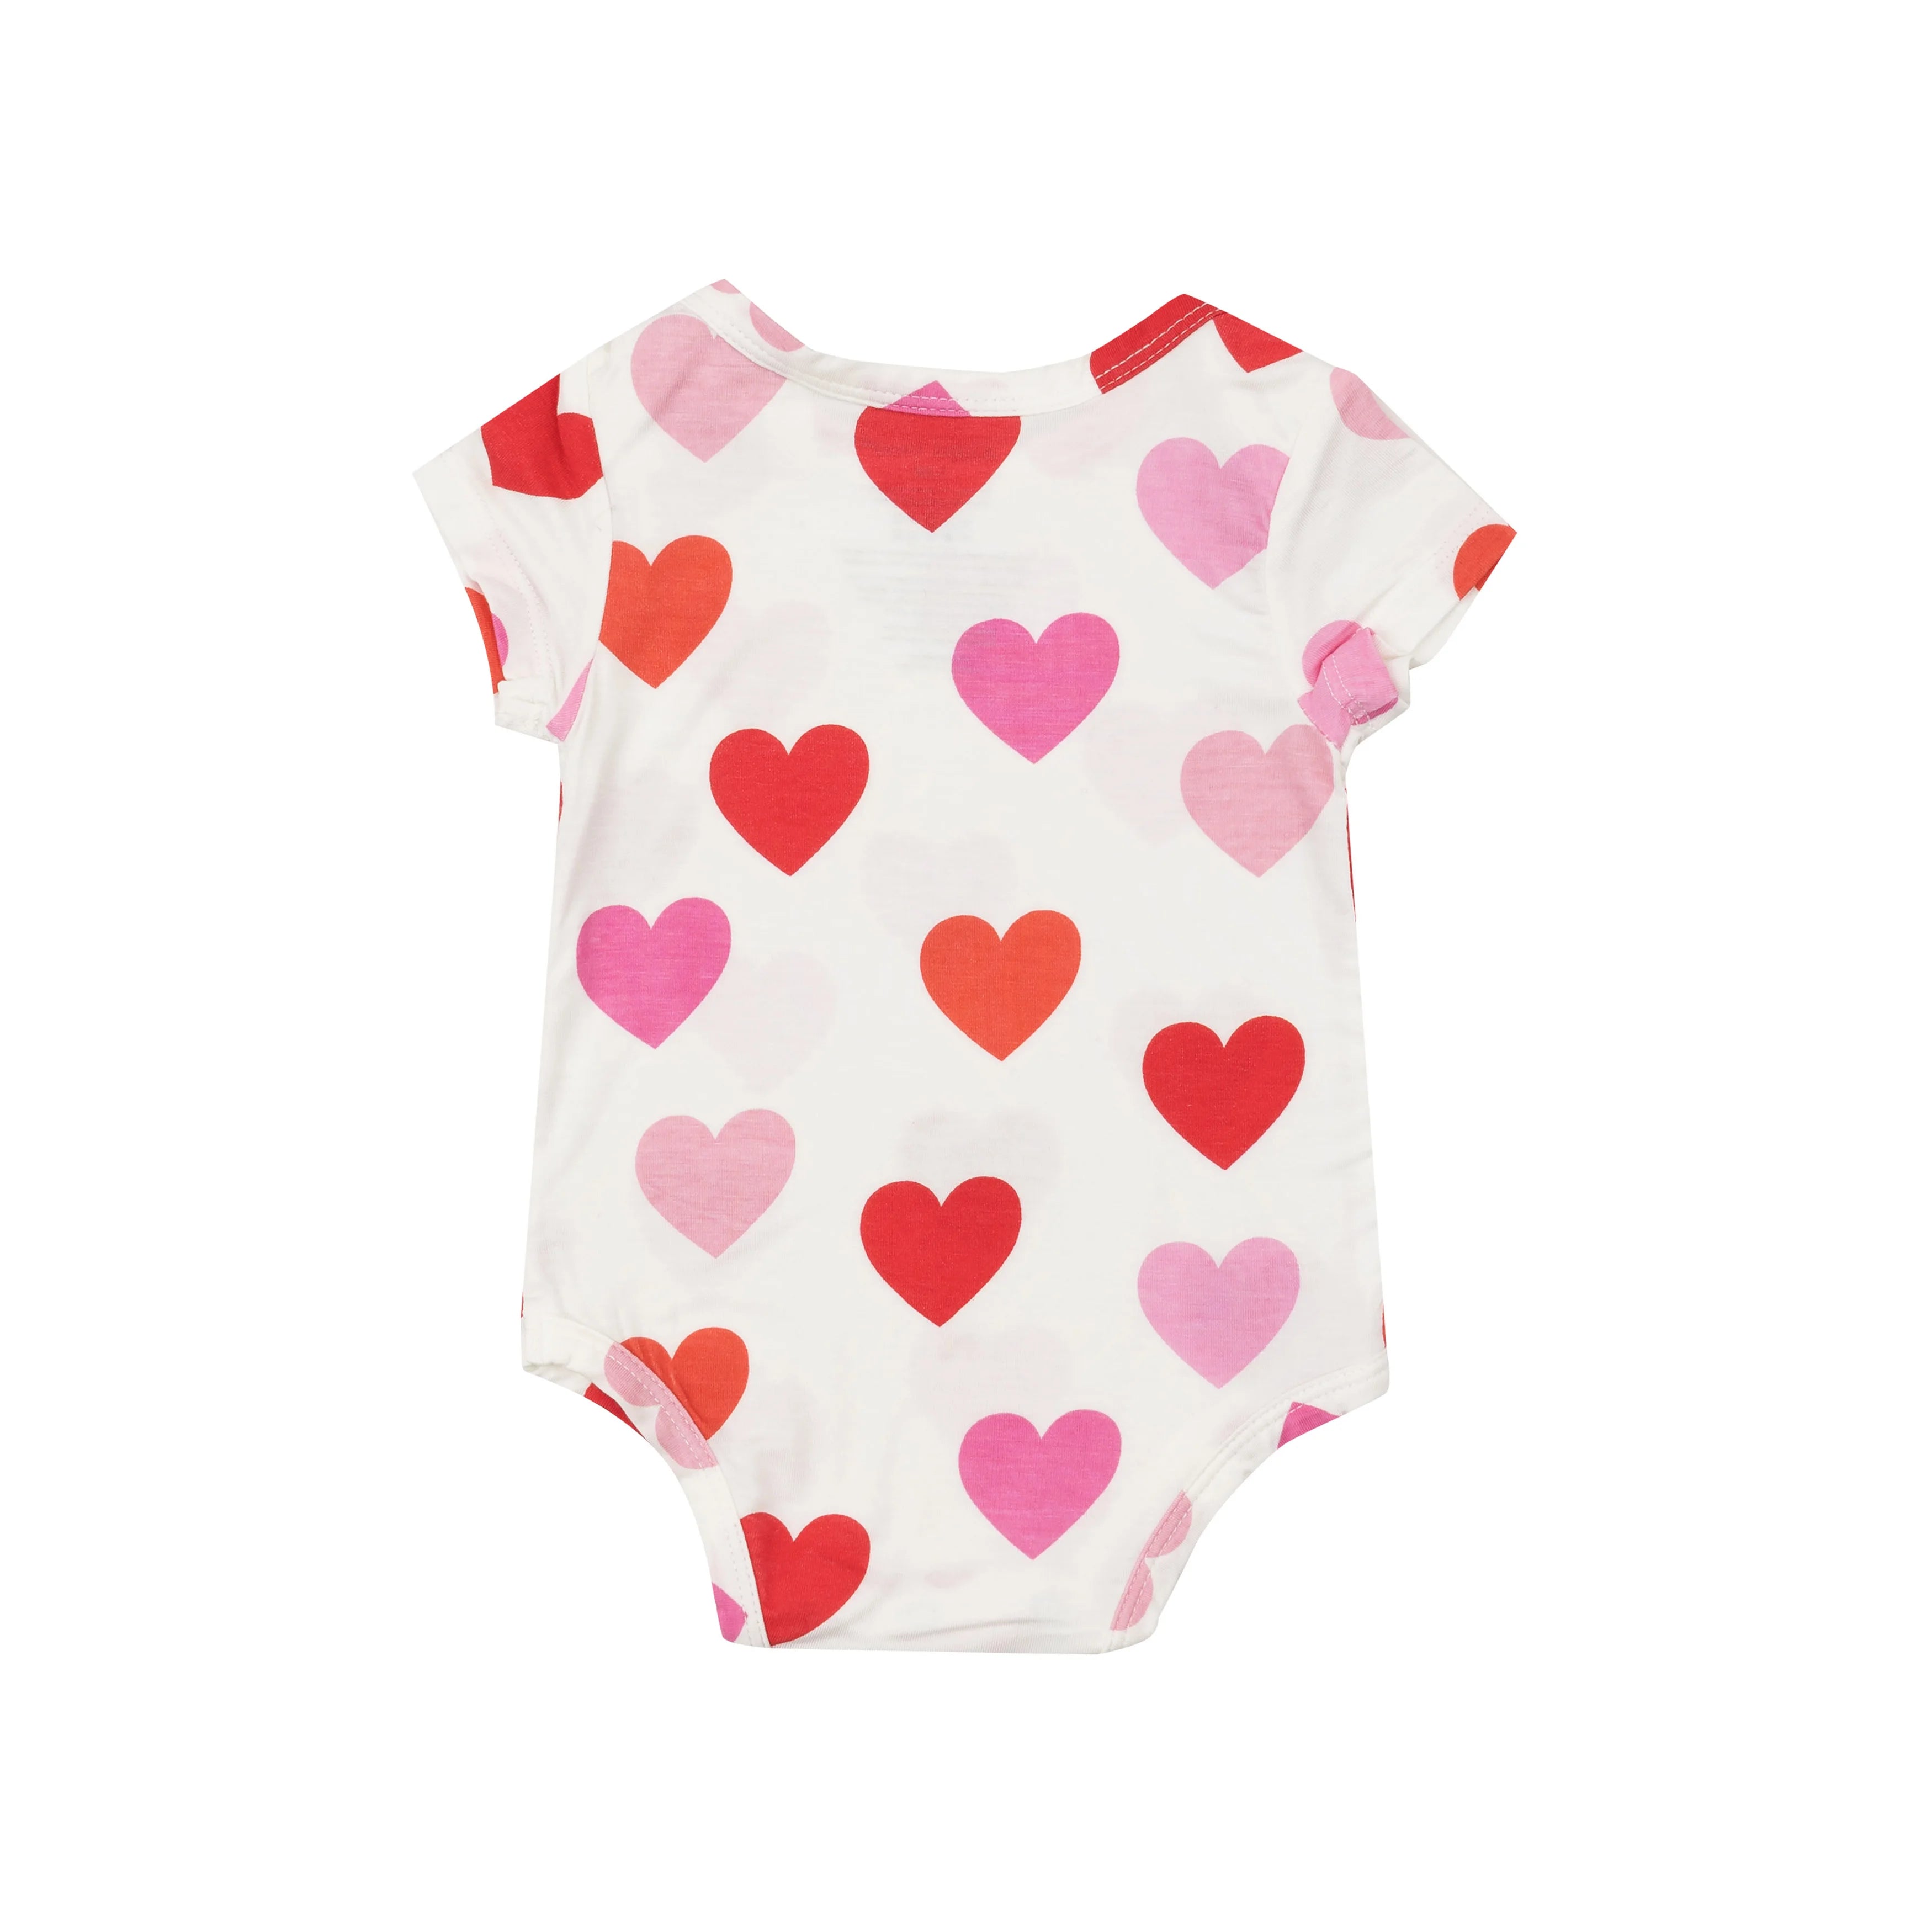 back of onesie with heart print all over